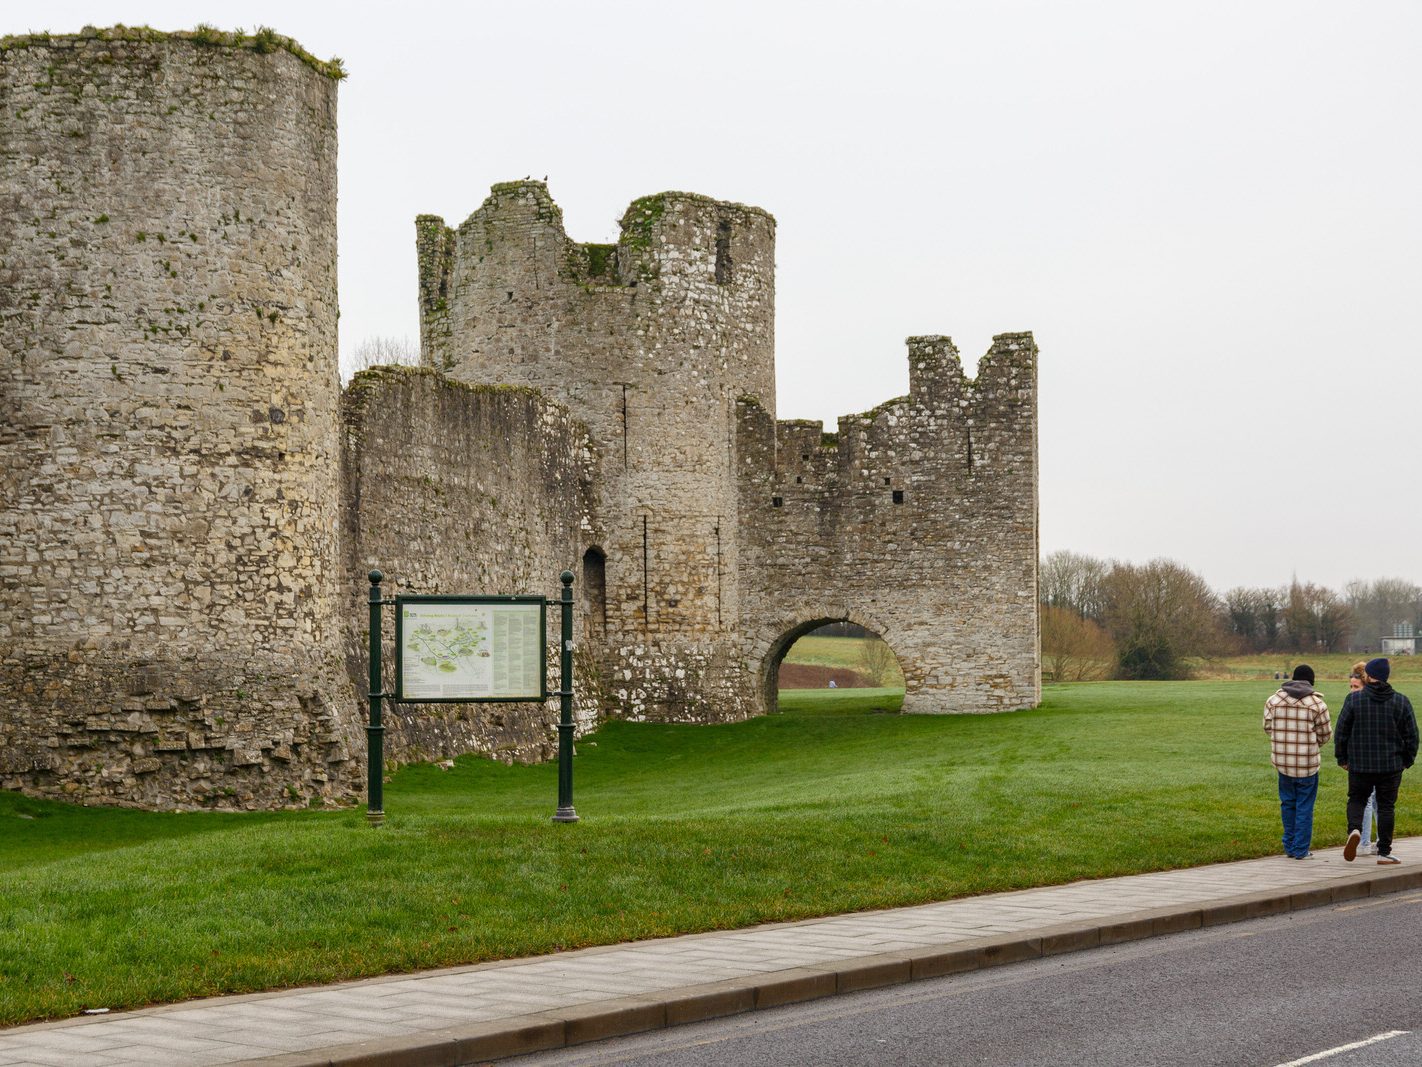 ON ST STEPHEN'S DAY I VISITED THE SOUTH BANK IN ORDER TO PHOTOGRAPH TRIM CASTLE [26 DECEMBER 2023]-226501-1